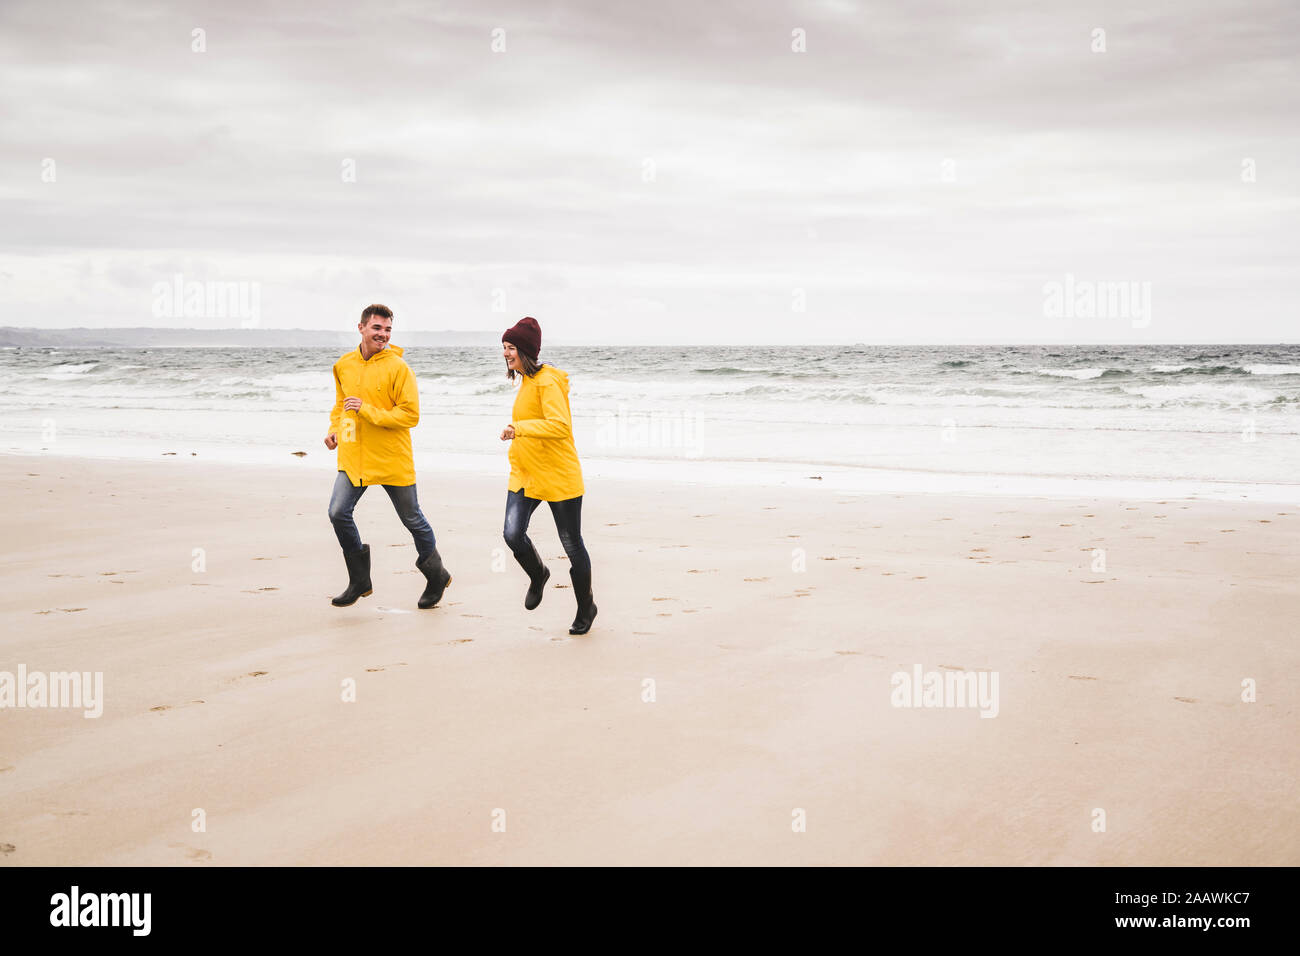 Young woman wearing yellow rain jackets and running at the beach, Bretagne, France Stock Photo